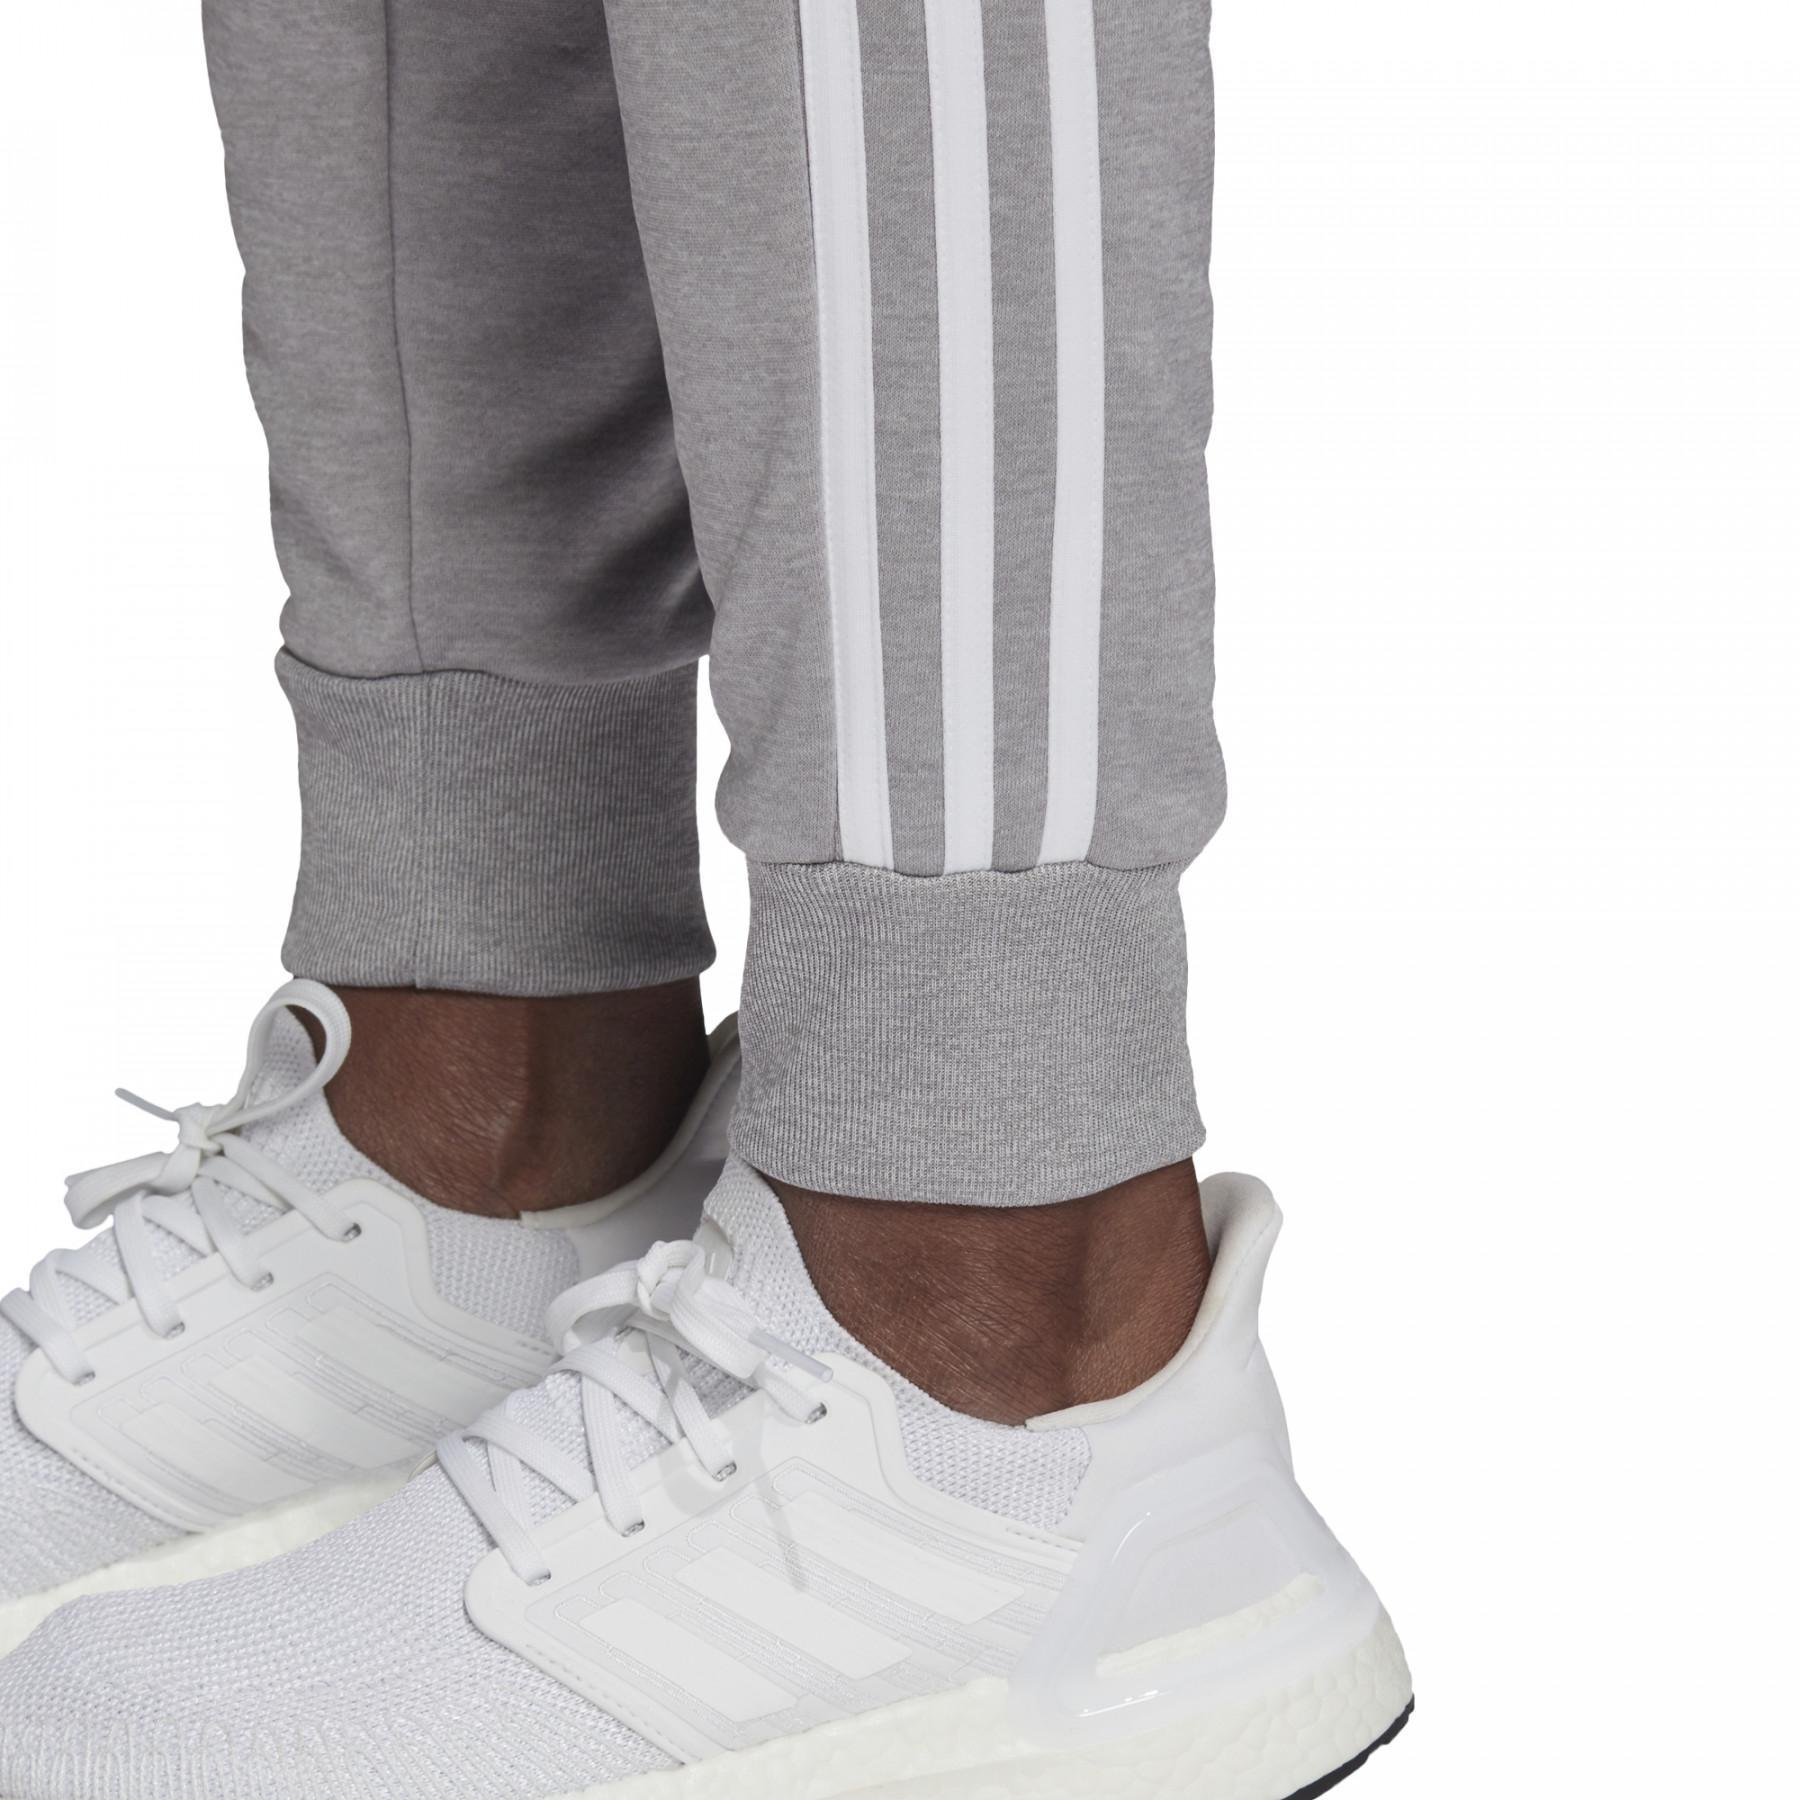 Women's tracksuit adidas Game Time